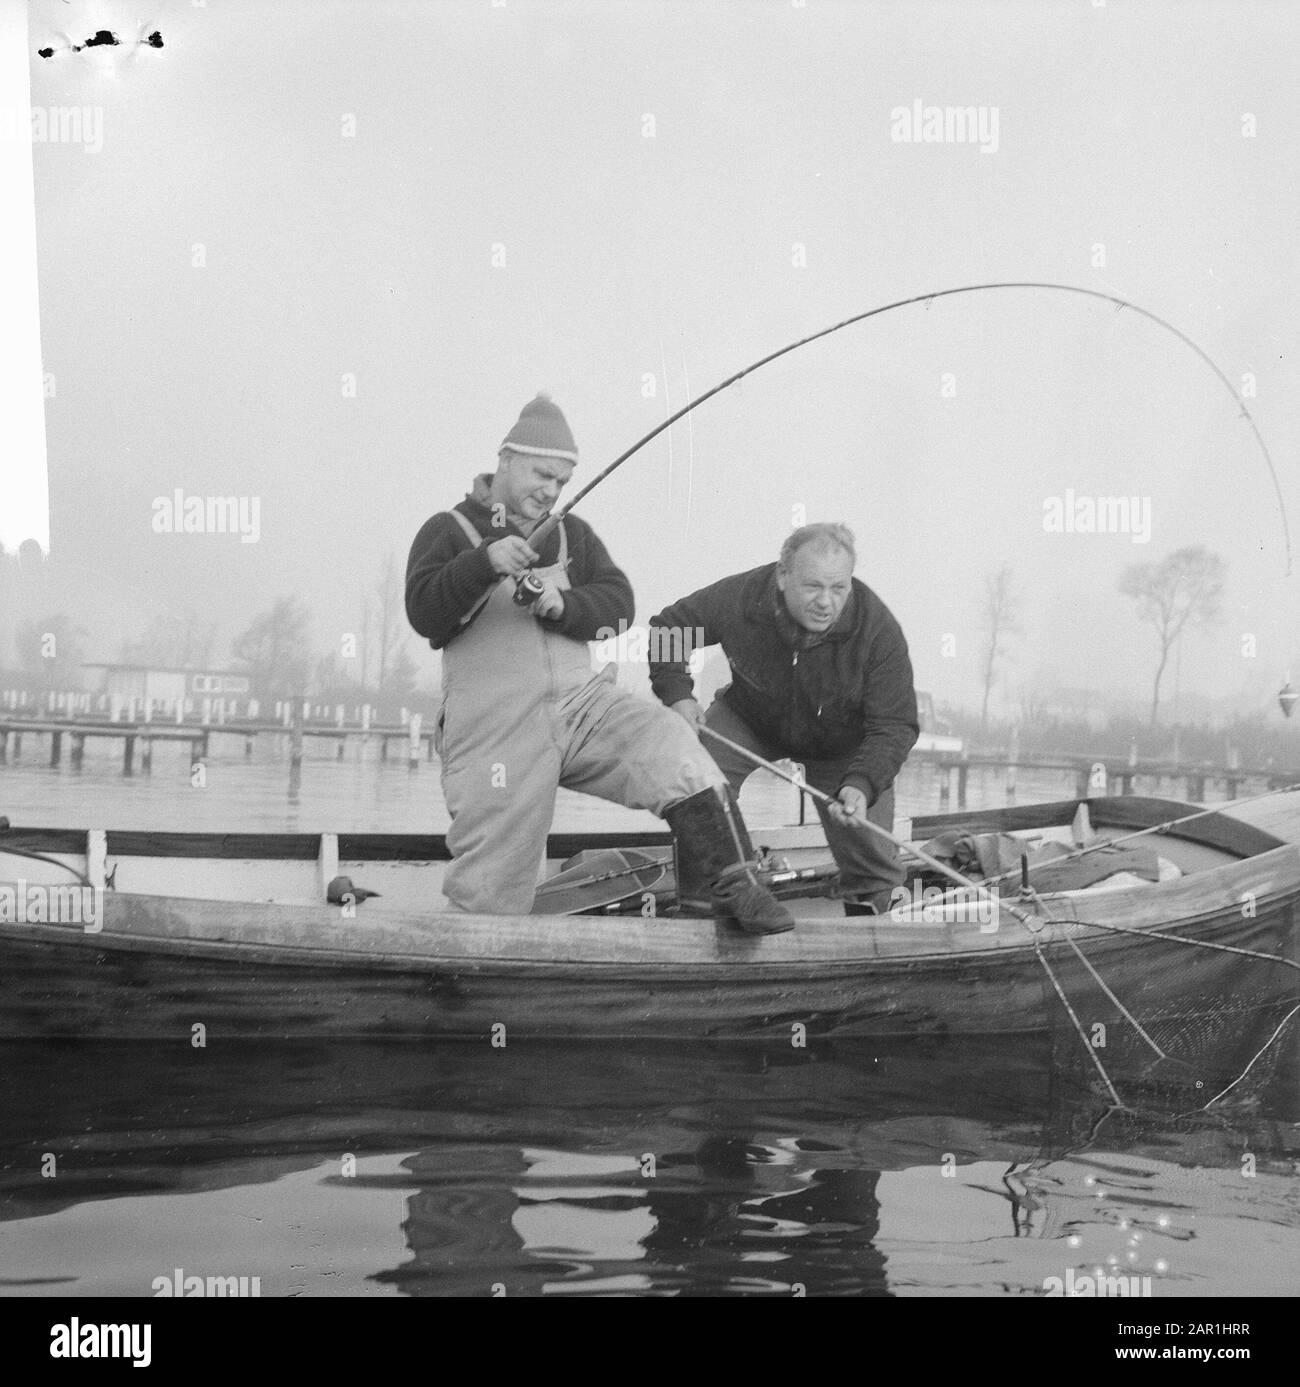 Fishermen exercising their hobby  Two men while fishing standing from a boat Date: 14 November 1965 Keywords: fishing, motor boats Stock Photo